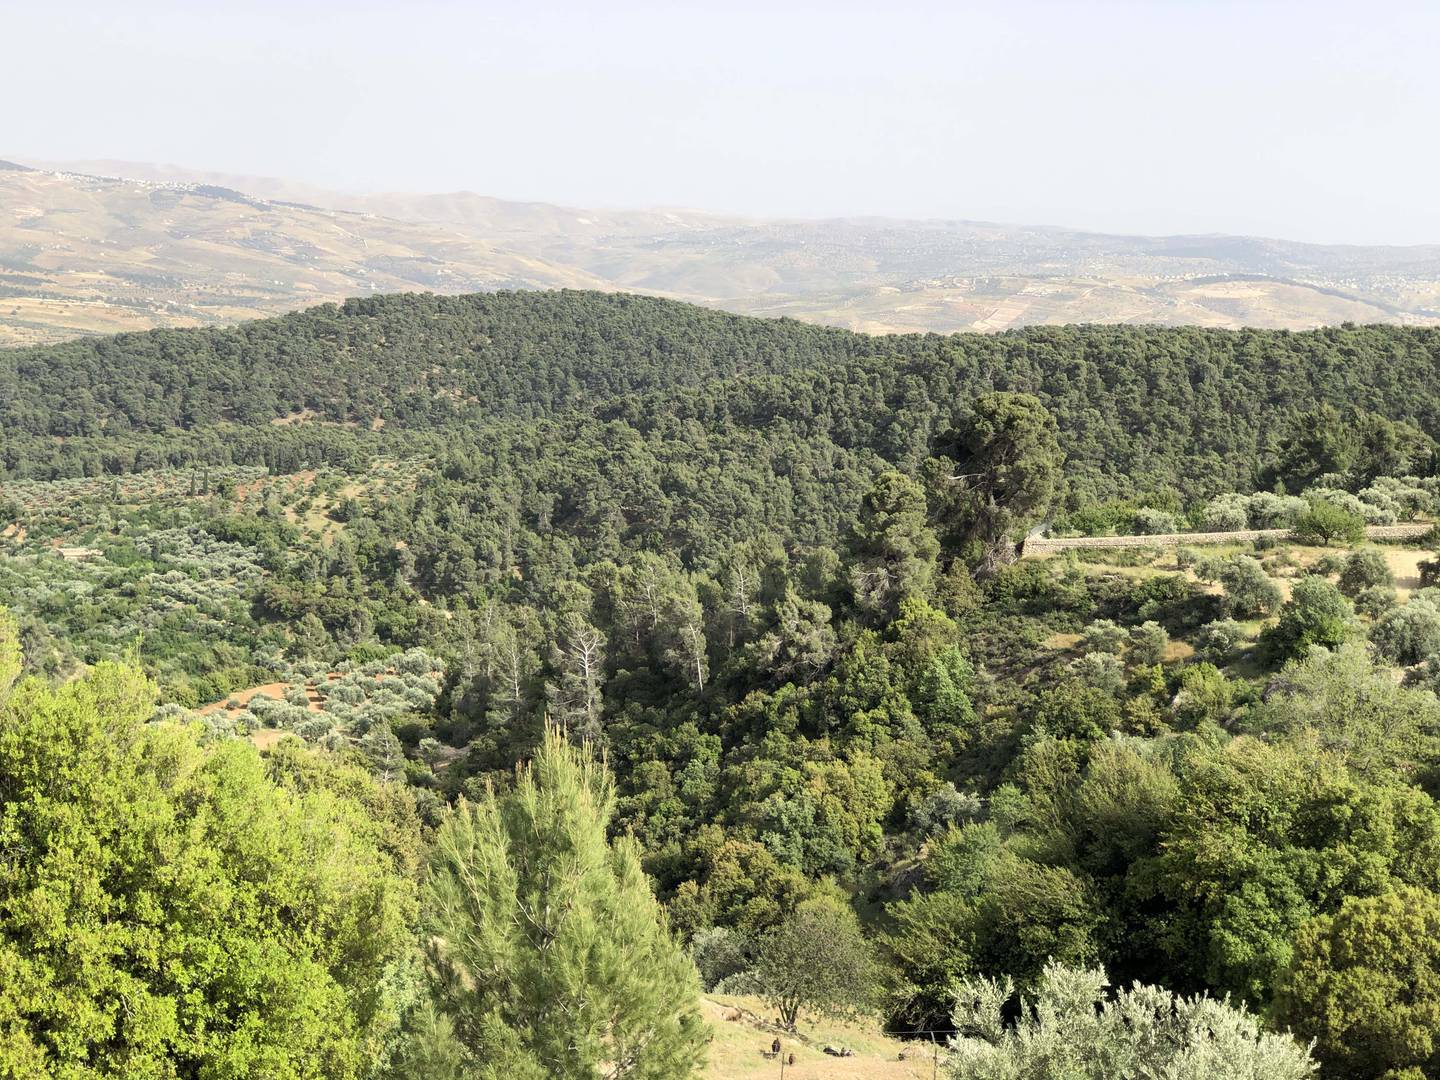 The olive groves and forest in the village of Dibbeen, about 50 kilometers northwest of Amman.  Khaled Yacoub Oweis / Le National